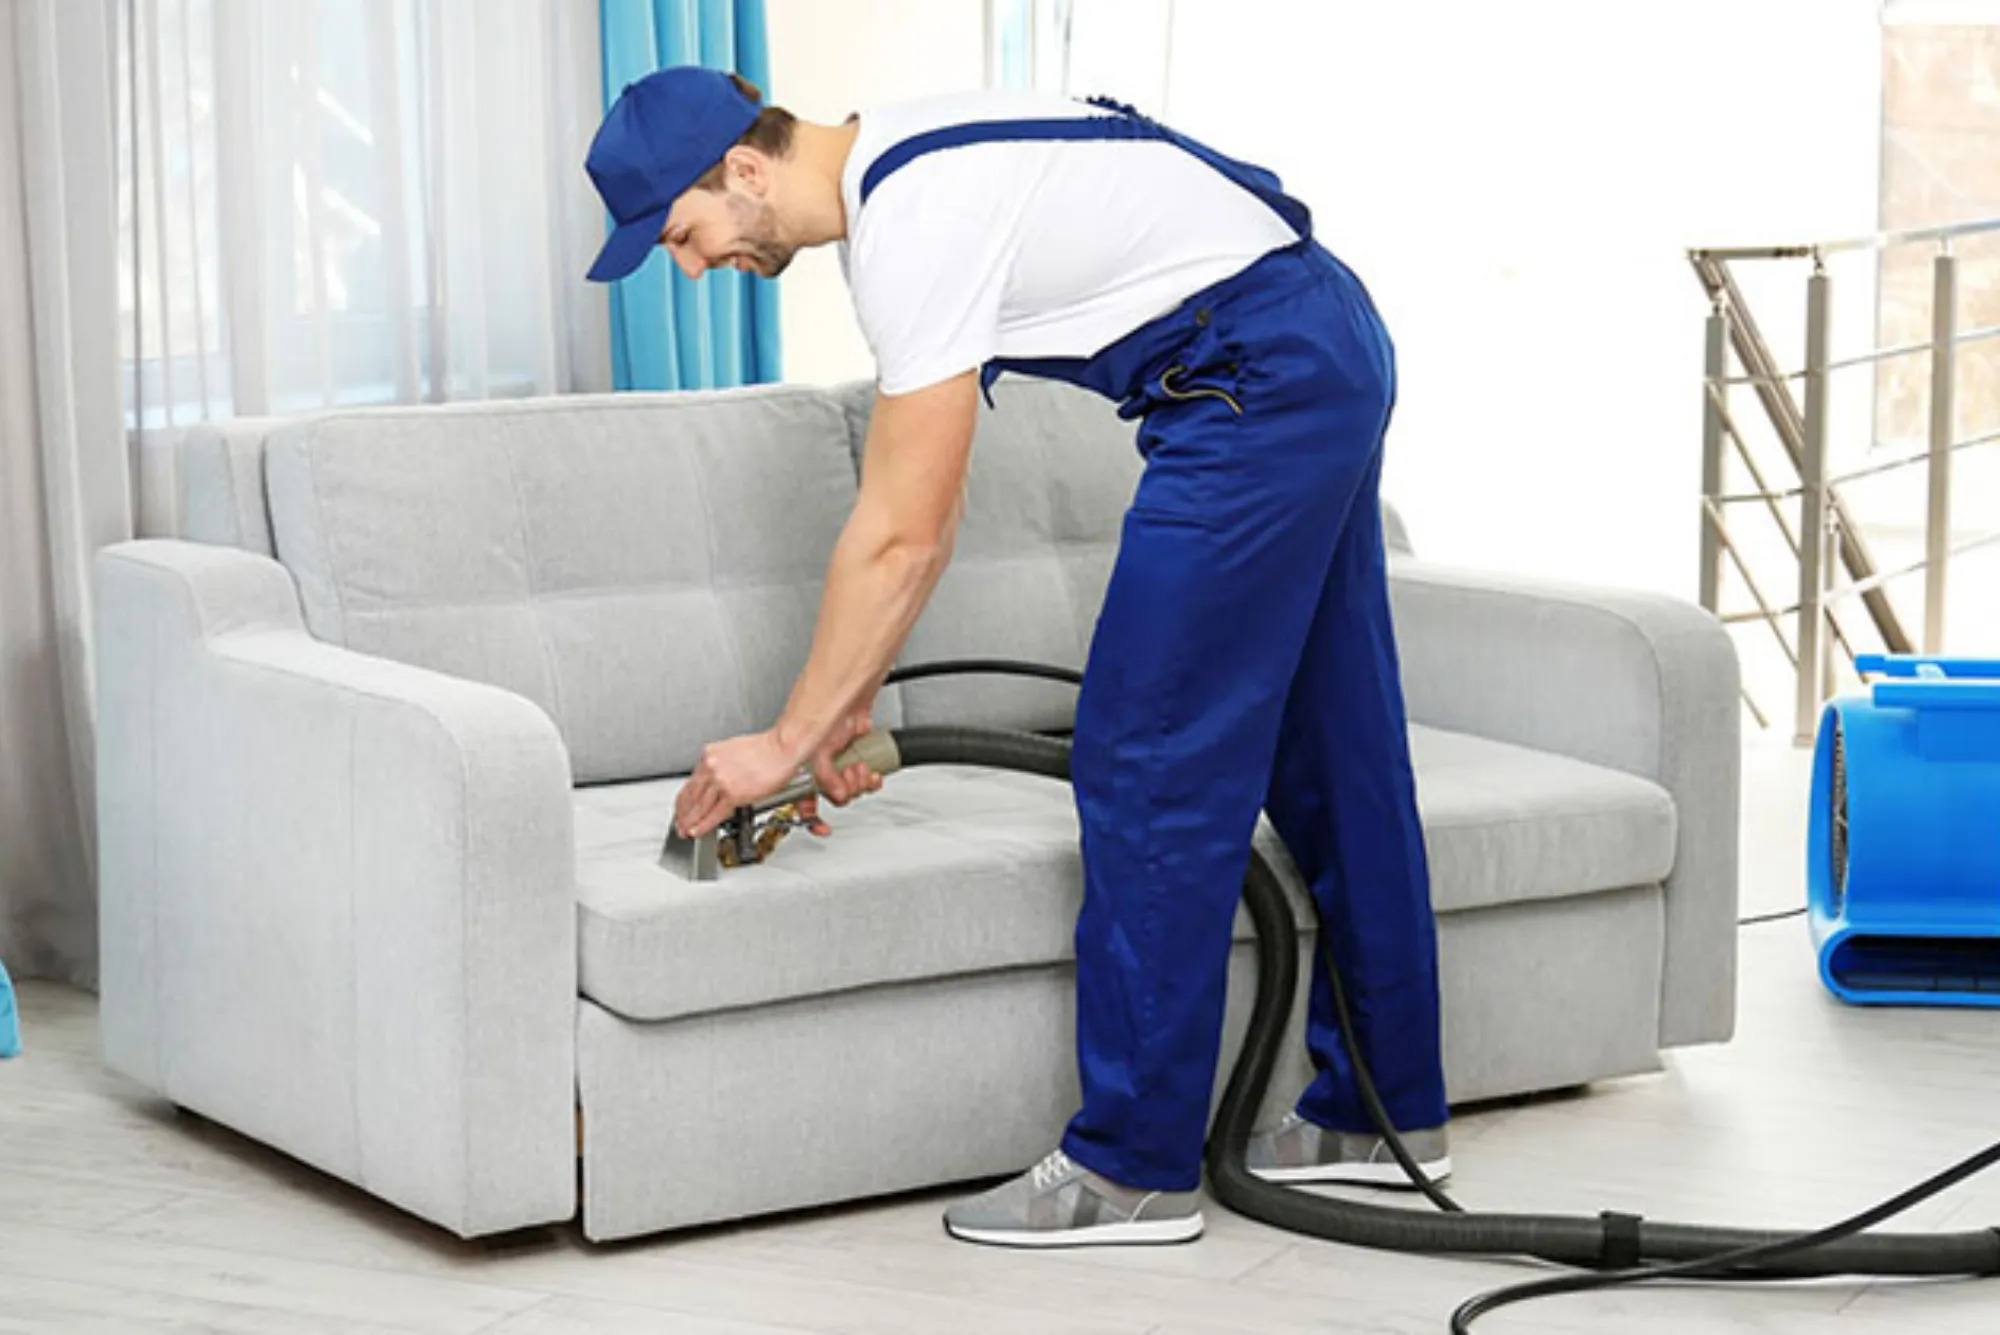 How Much Does it Cost to Have Your Sofa Cleaned?